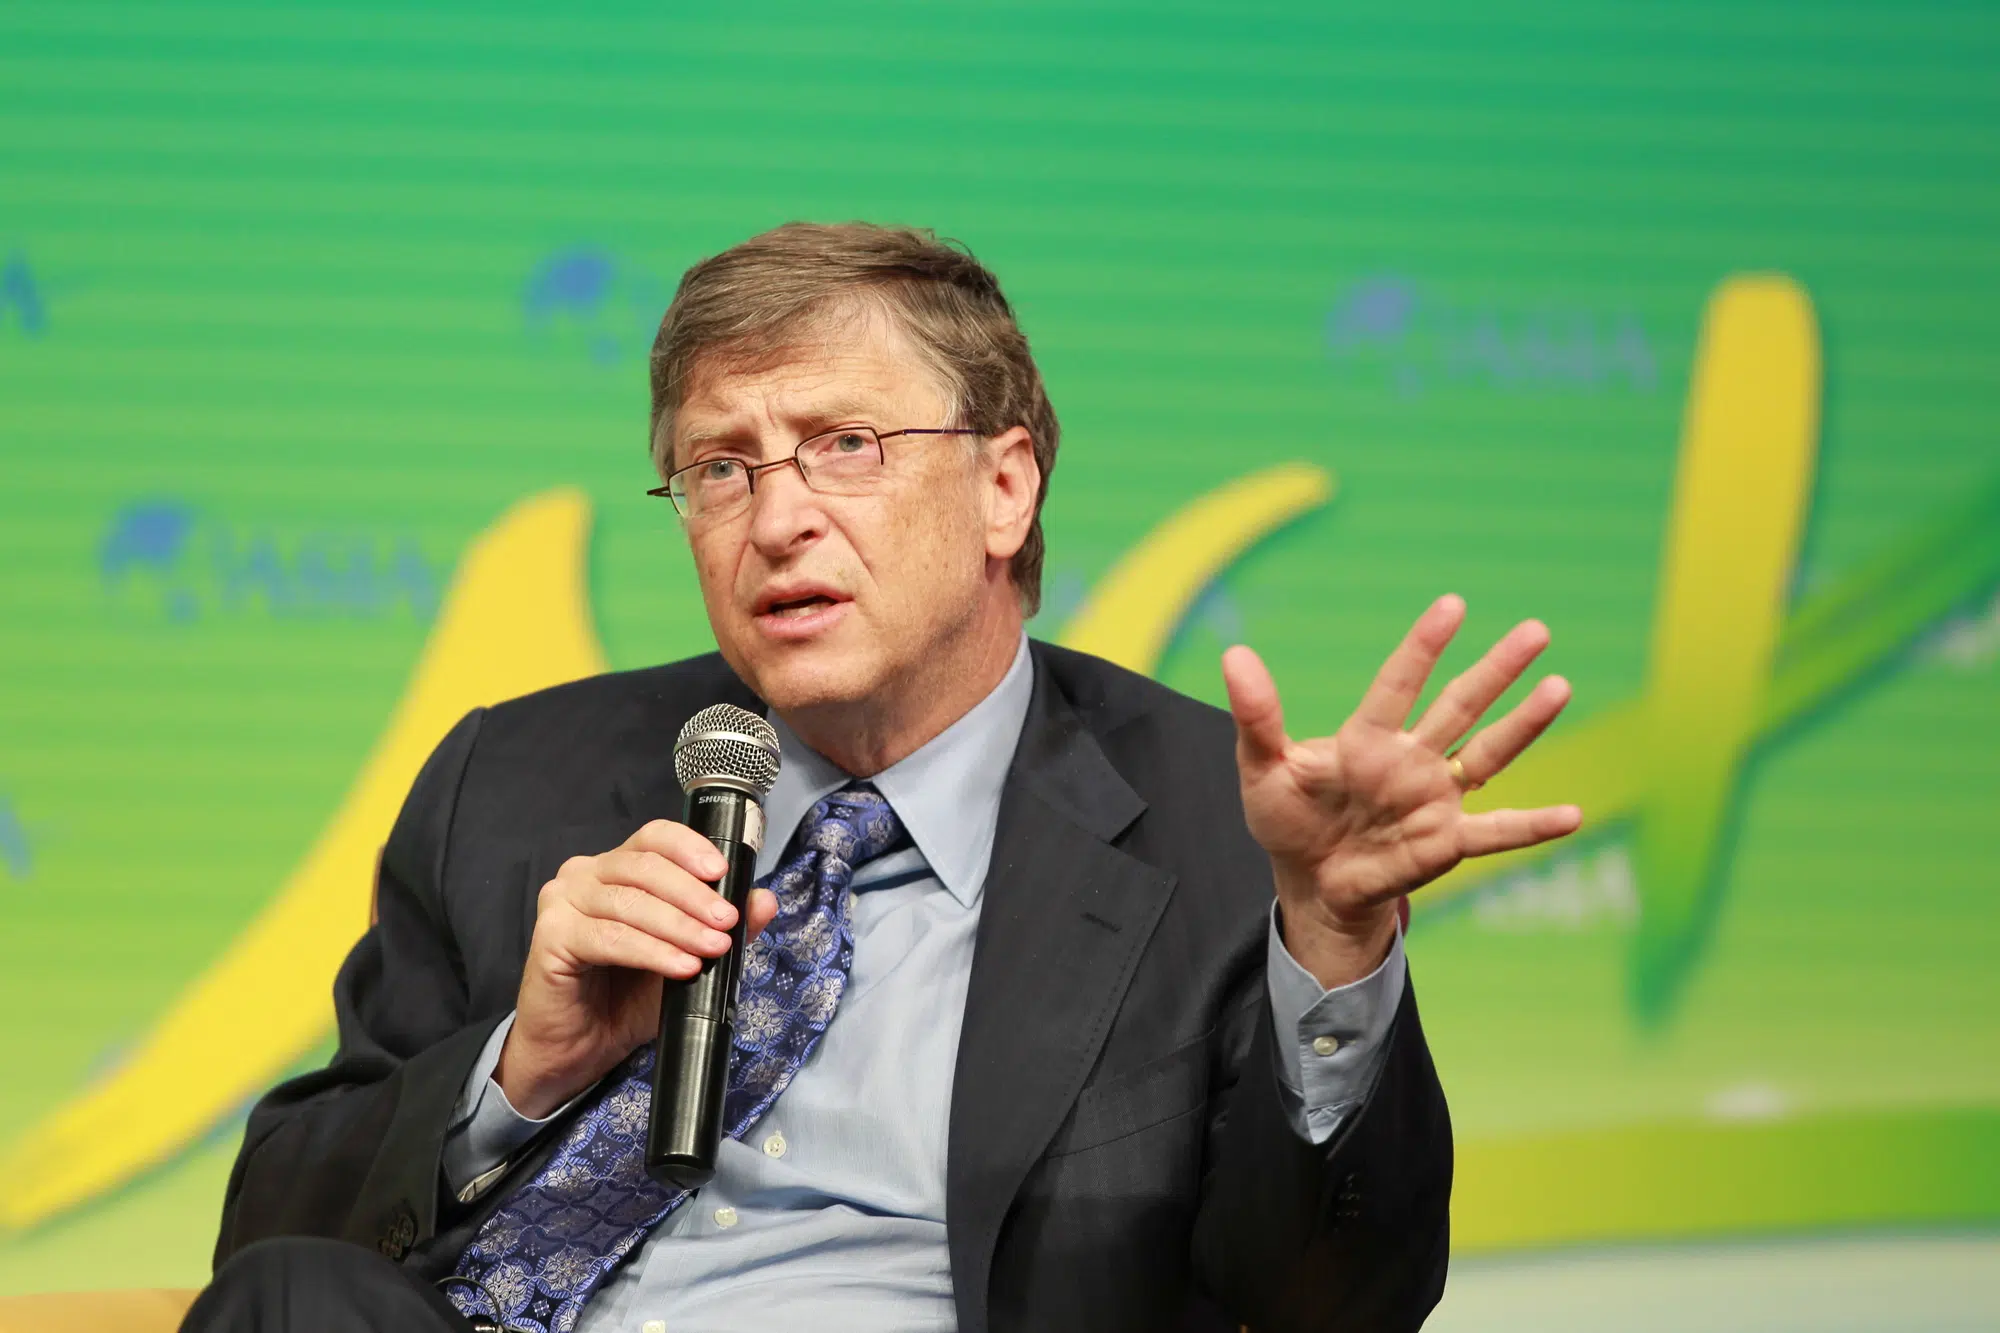 Bill Gates, Co-Chair of the Bill and Melinda Gates Foundation, talks at a sub-forum during the 2013 Boao Forum for Asia in Boao town, Qionghai city, south Chinas Hainan province, 6 April 2013.